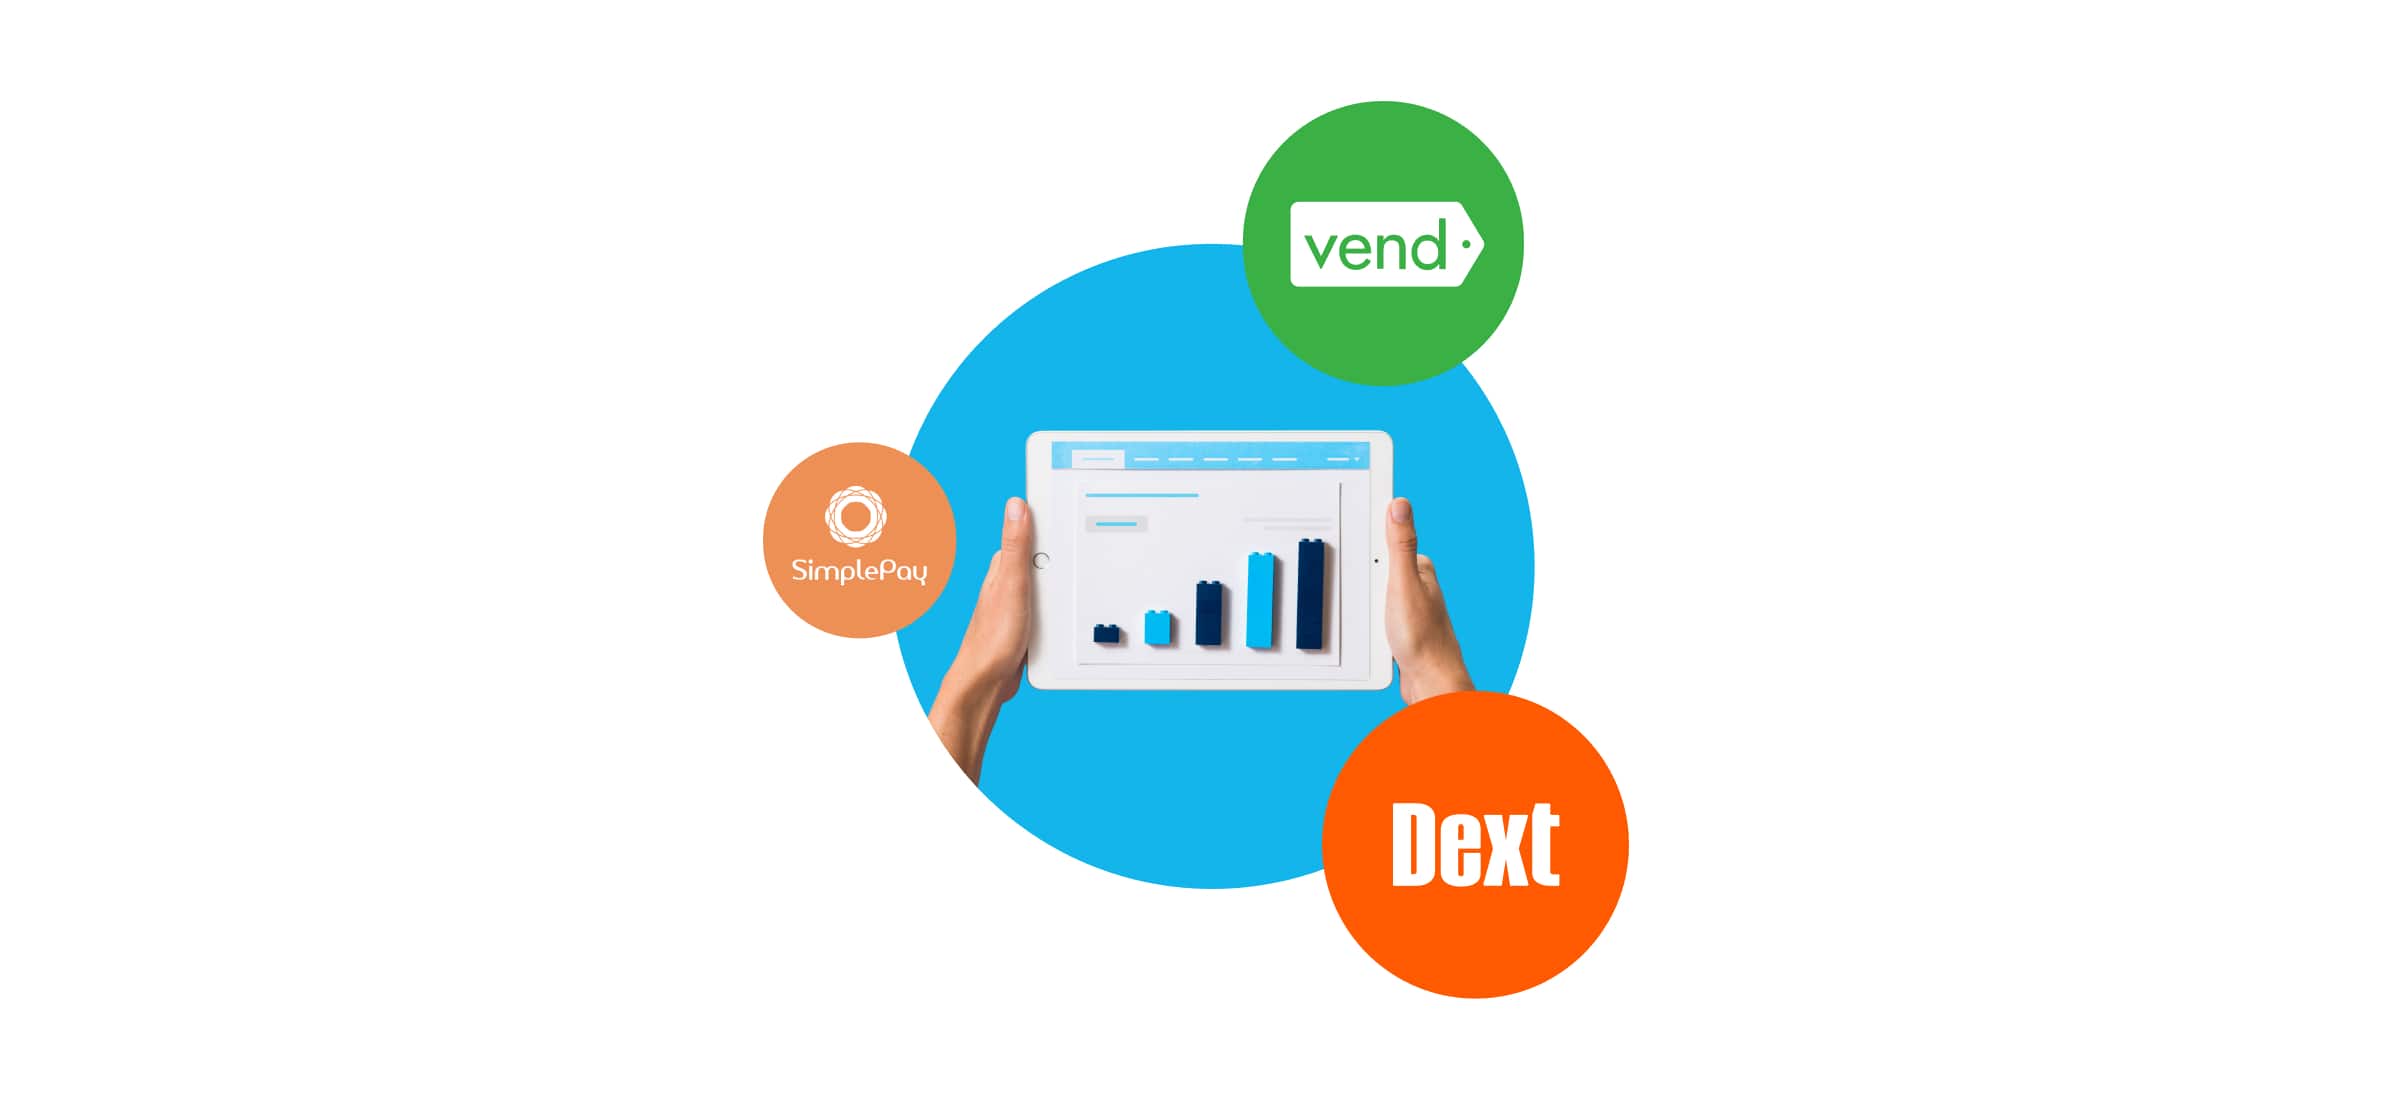 Hands holding a device with a bar graph, surrounded by three logos of Vend, Dext and SimplePay.